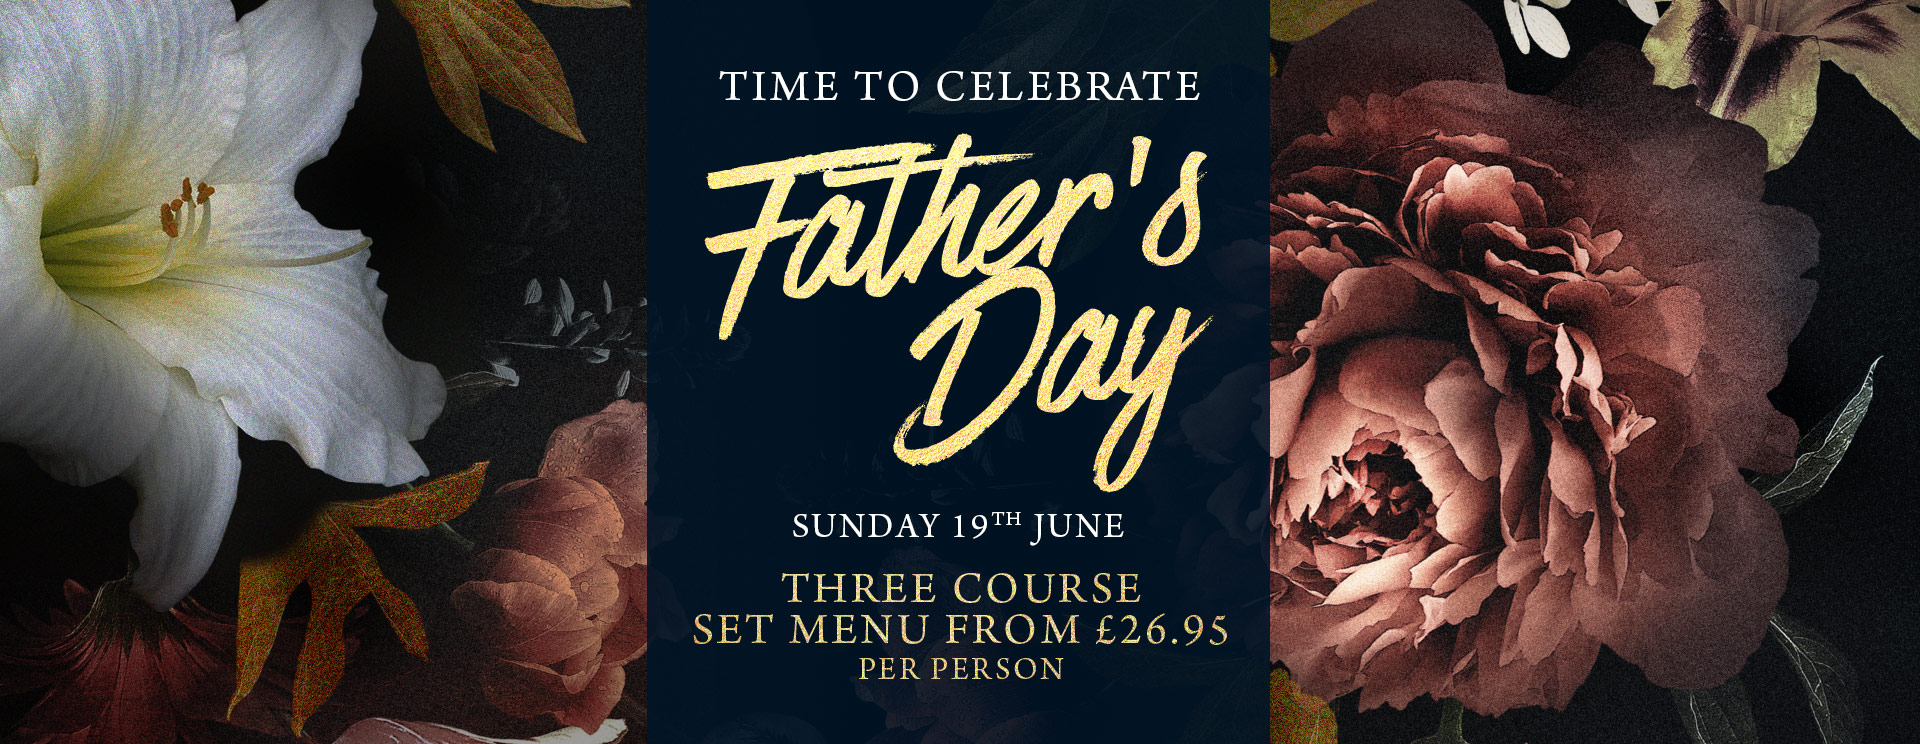 Fathers Day at The Spade Oak